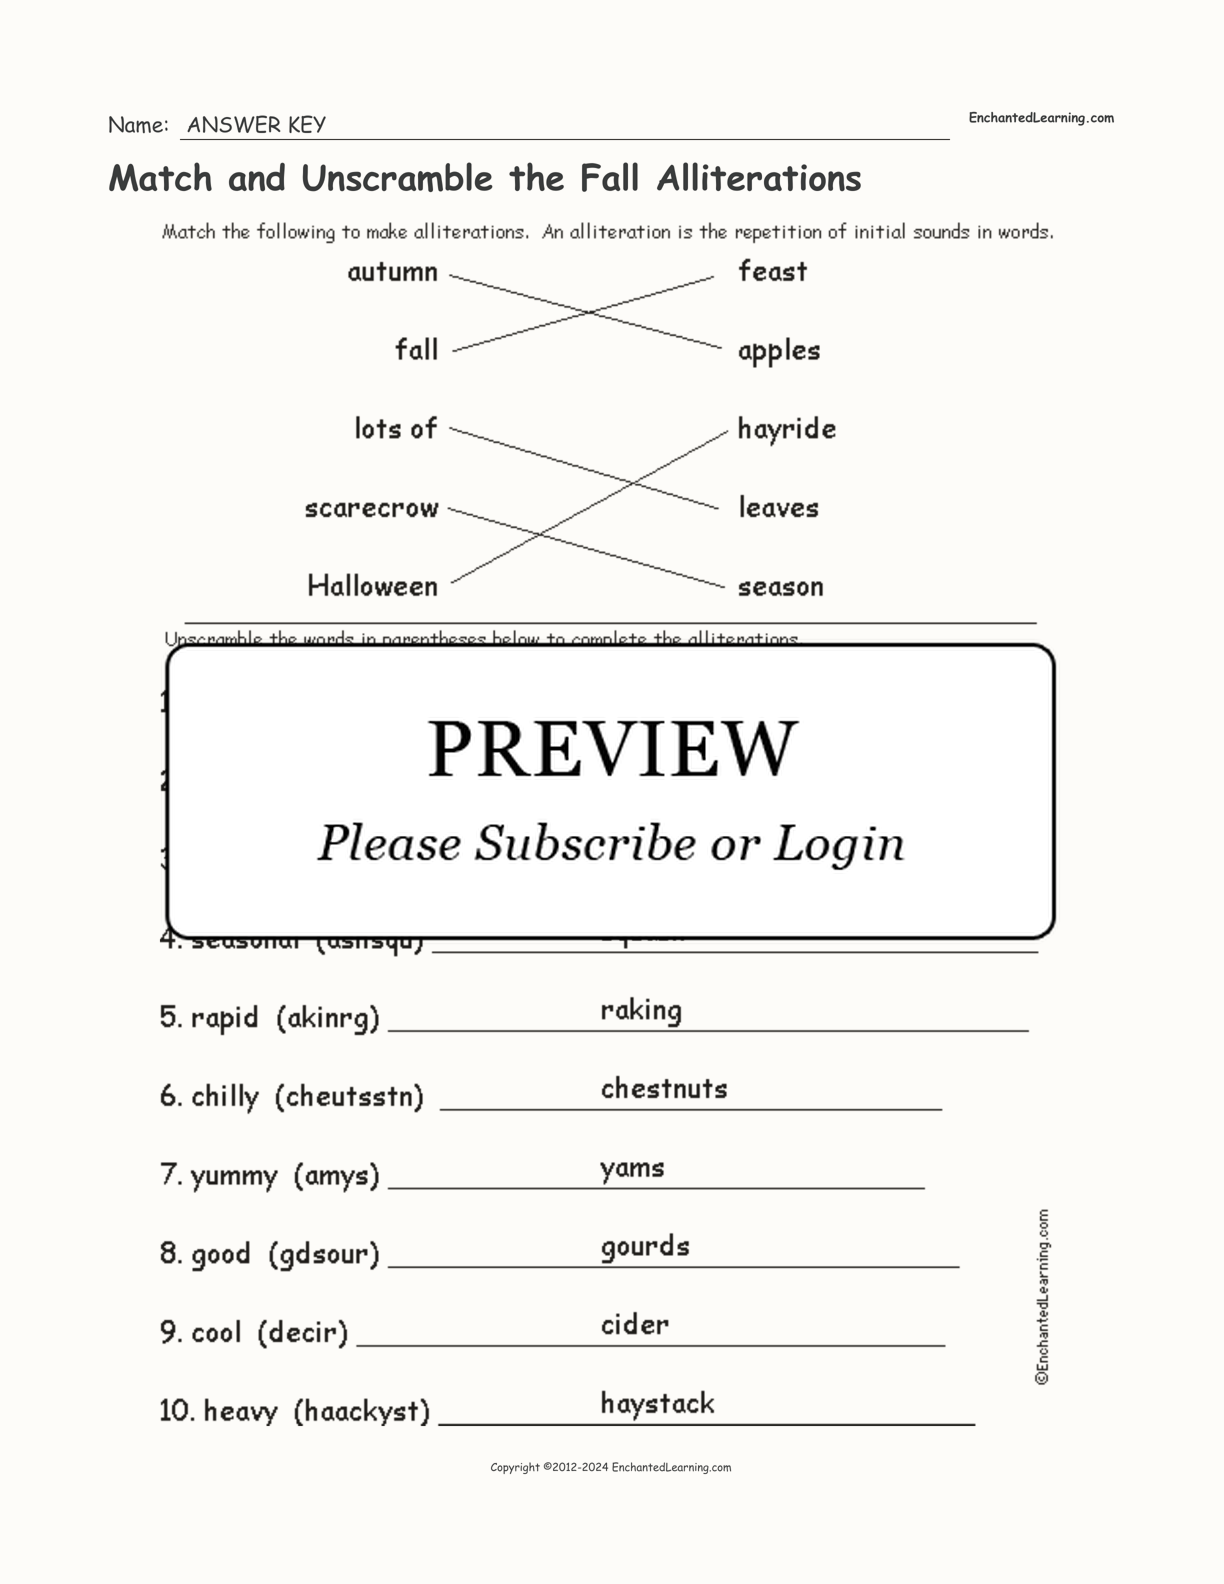 Match and Unscramble the Fall Alliterations interactive worksheet page 2